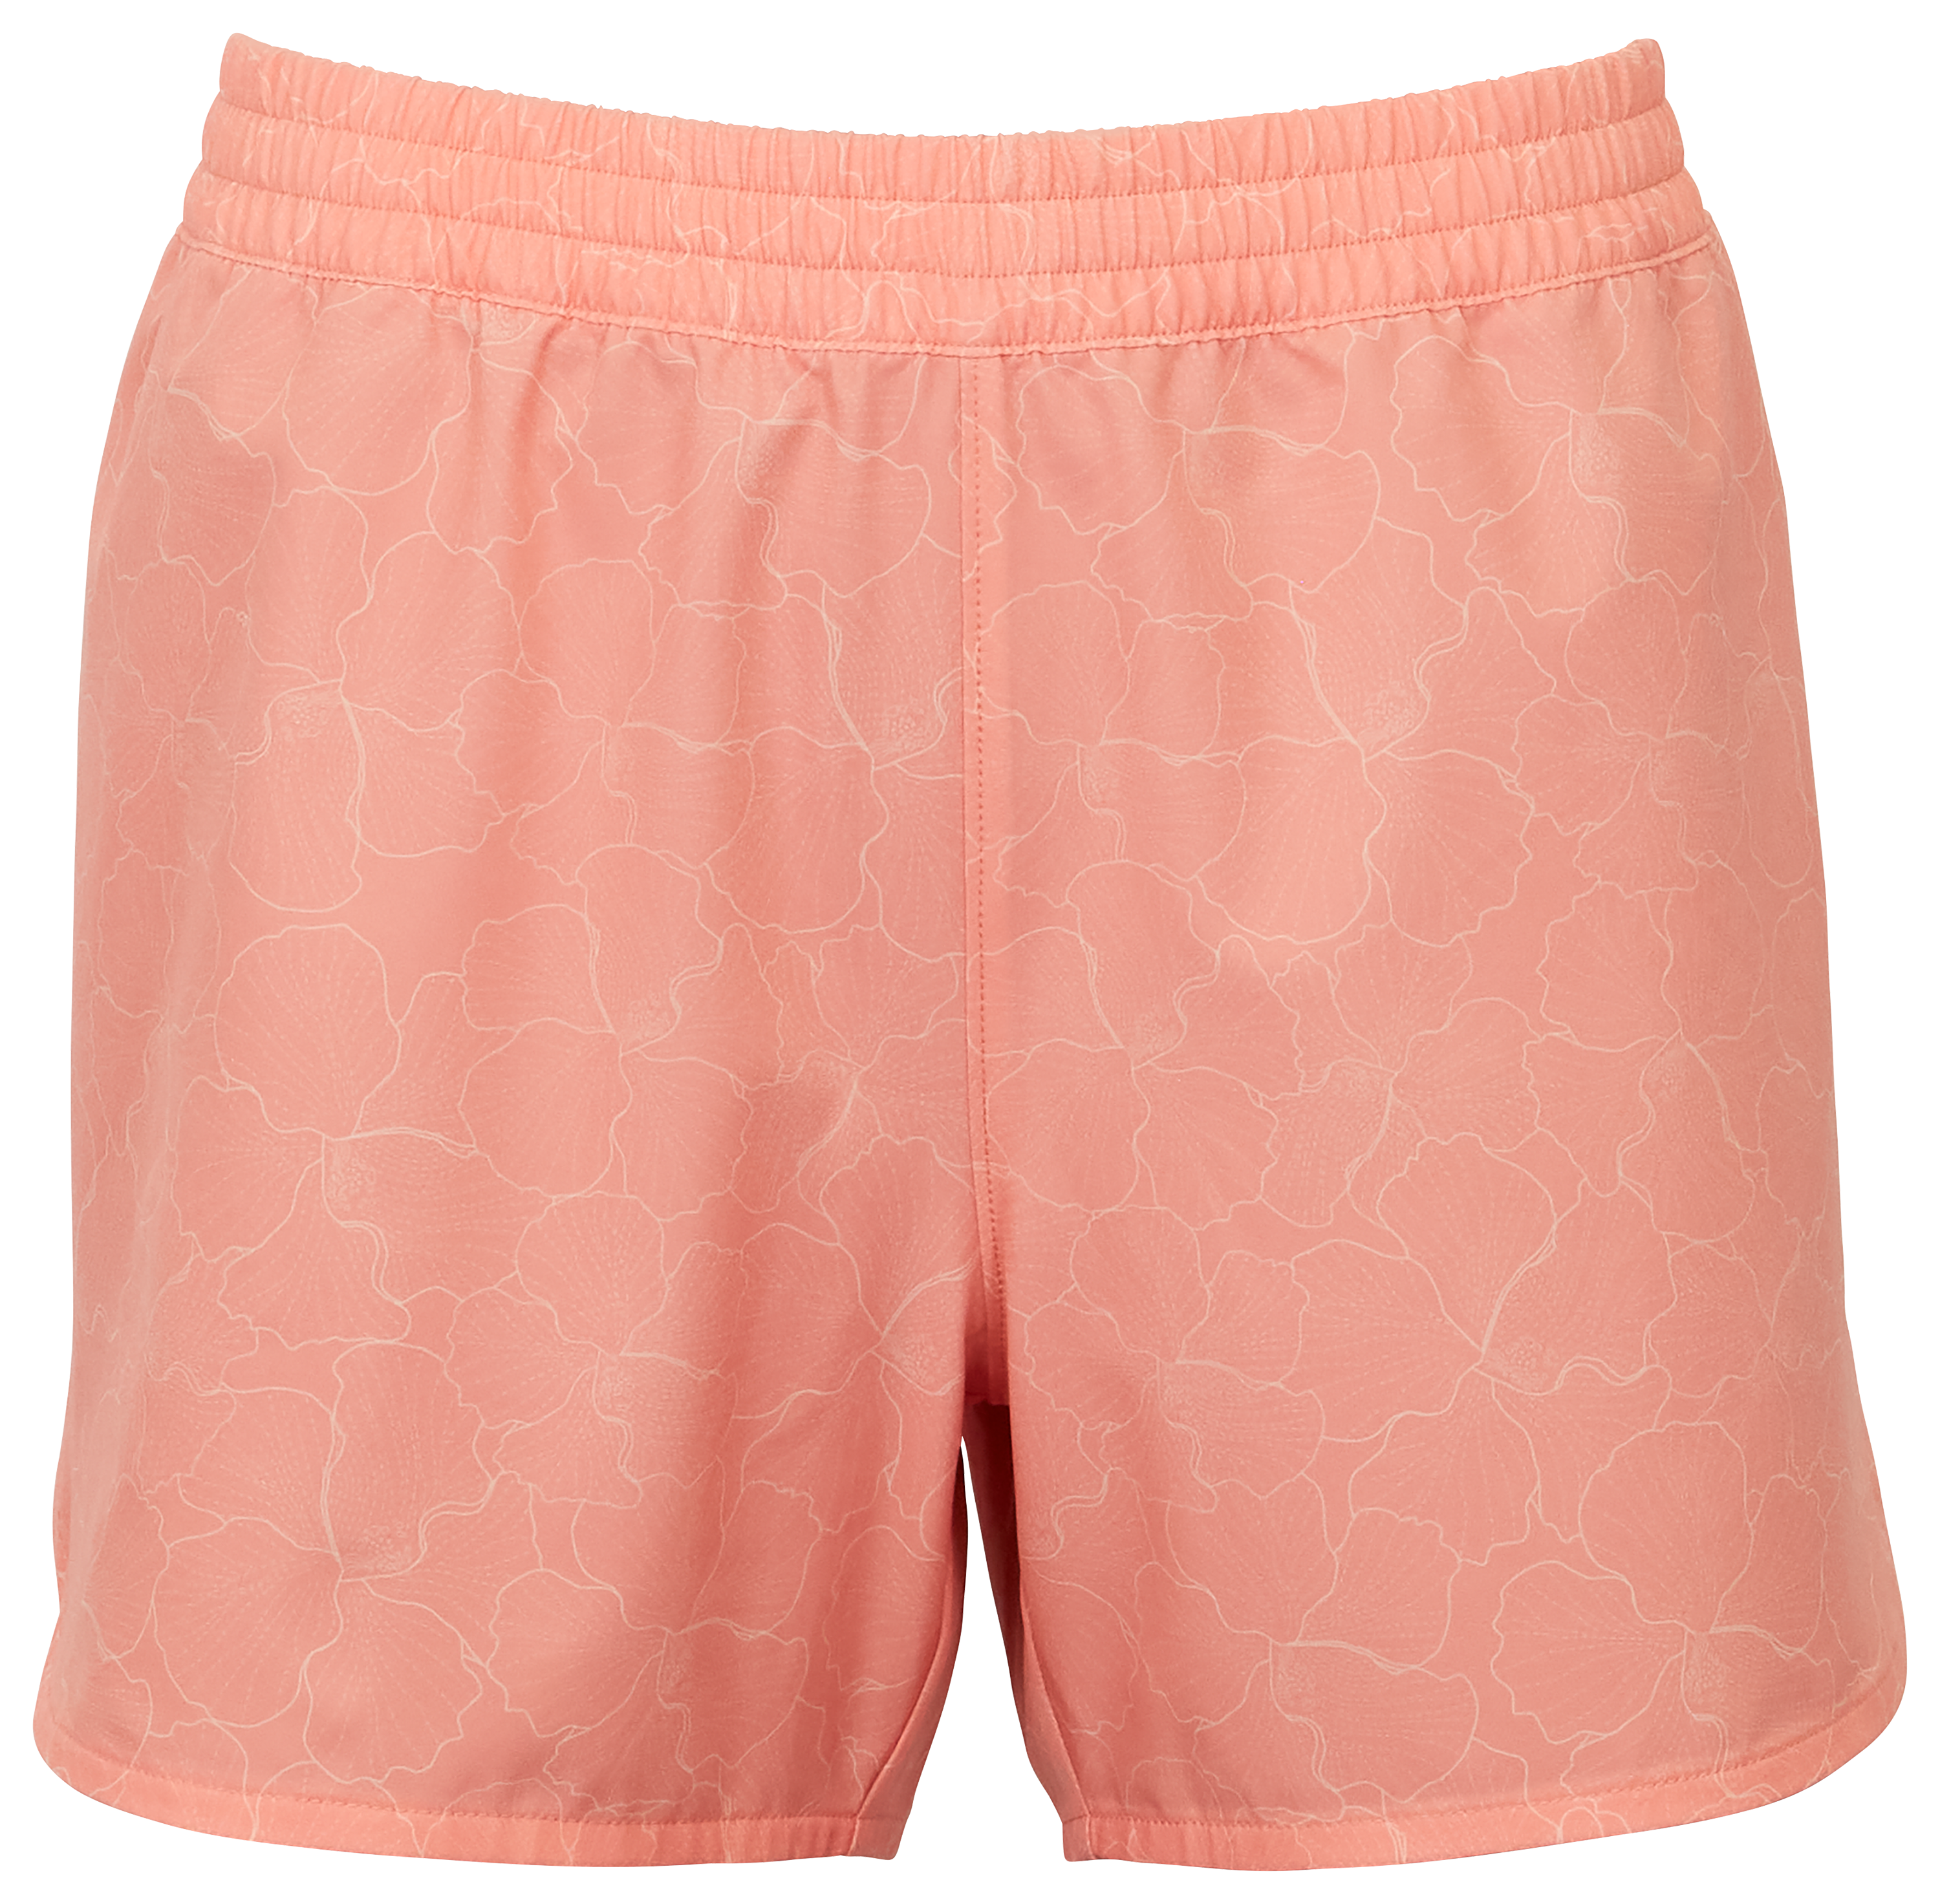 World Wide Sportsman Charter Print Pull-On Shorts for Ladies - Candlelight Hibicus - M